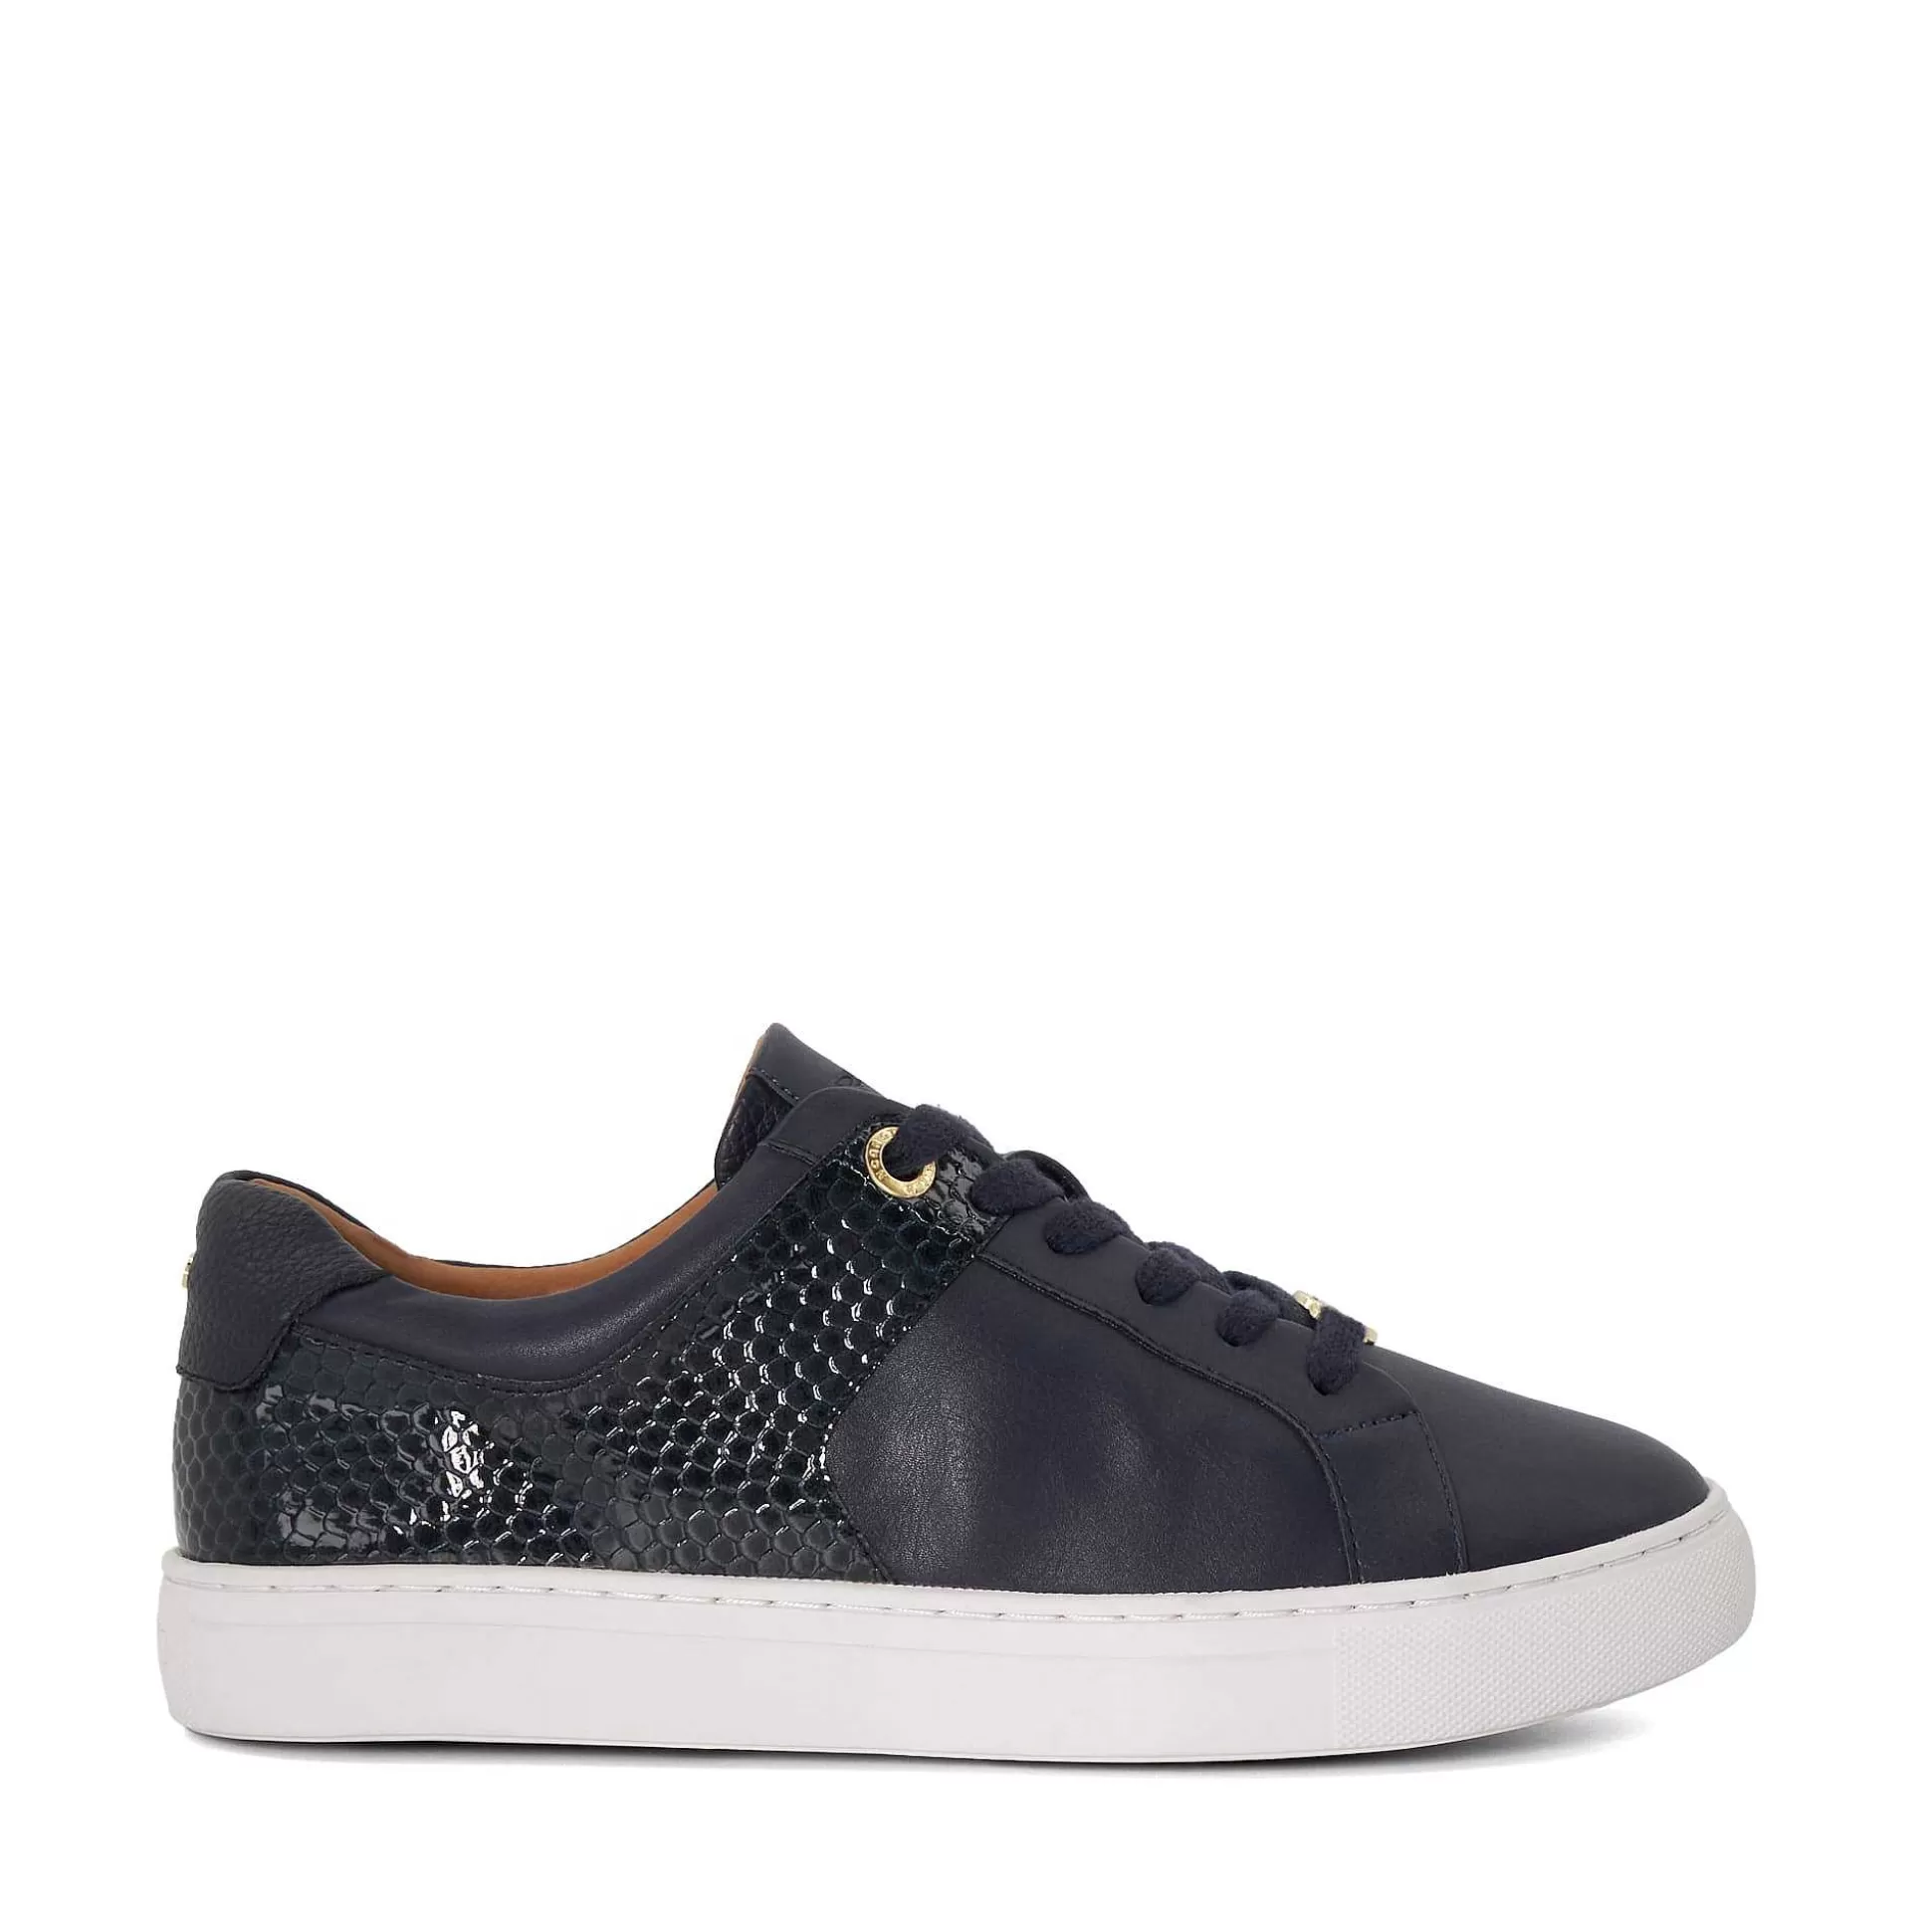 Dune London ELODIIE - NAVY-Women Flat Shoes | Trainers